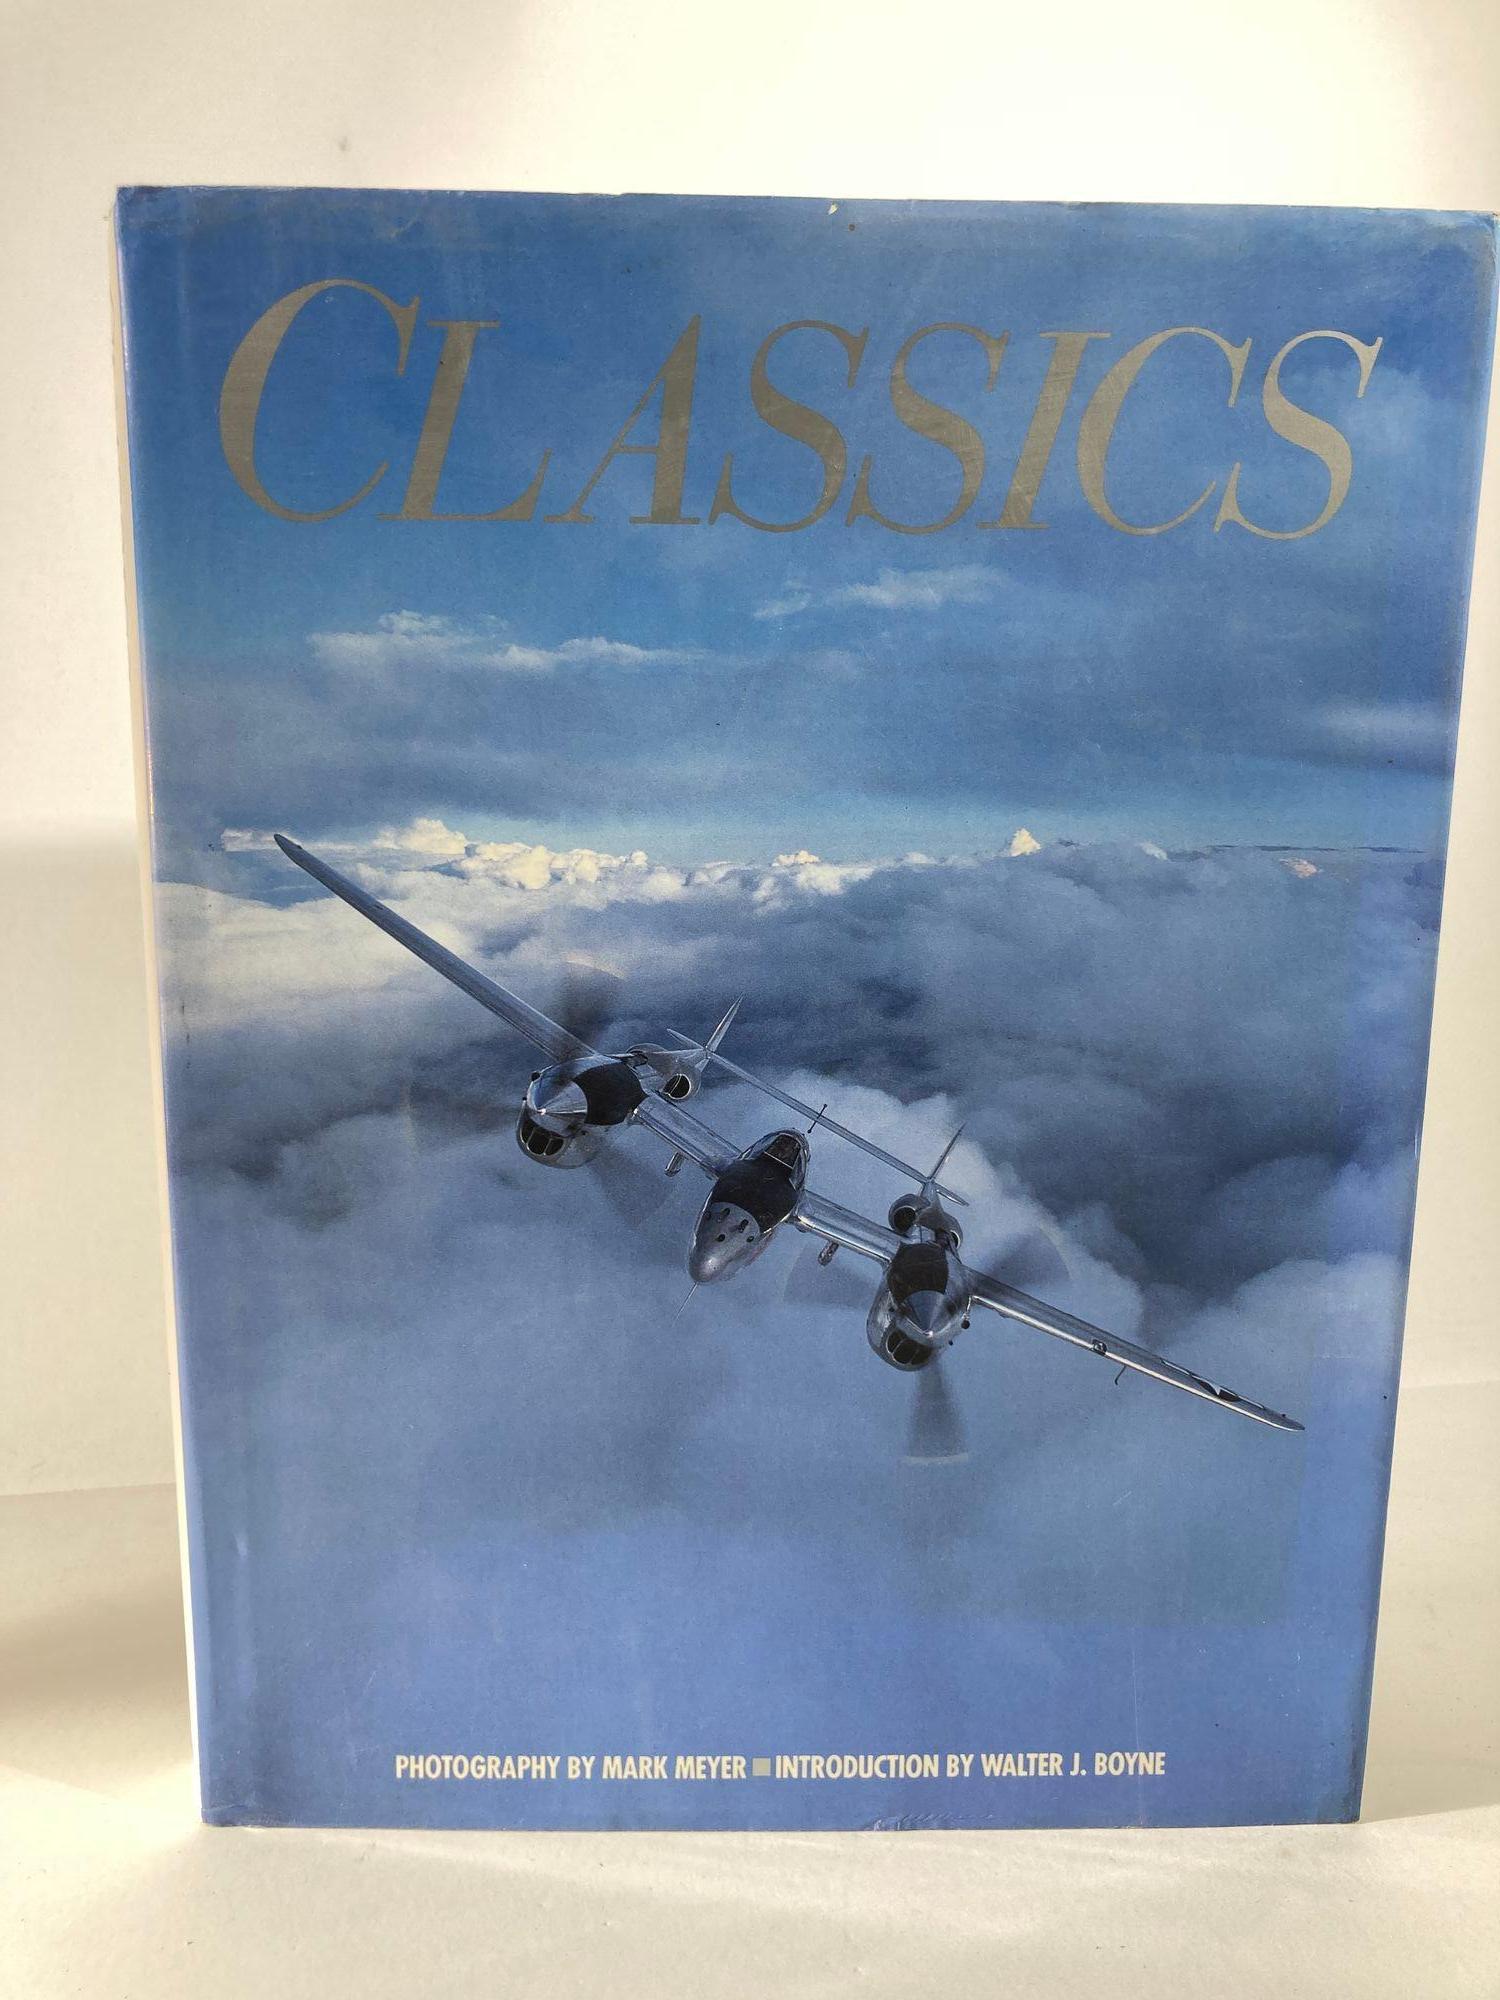 Classics : U. S. Aircraft of World War II by Walter J. Boyne, Mark Meyer.
A must for any WWII buff, this collection boasts photographs of restored aircraft and interviews with the men who flew them. The pilots discuss training, missions, and even